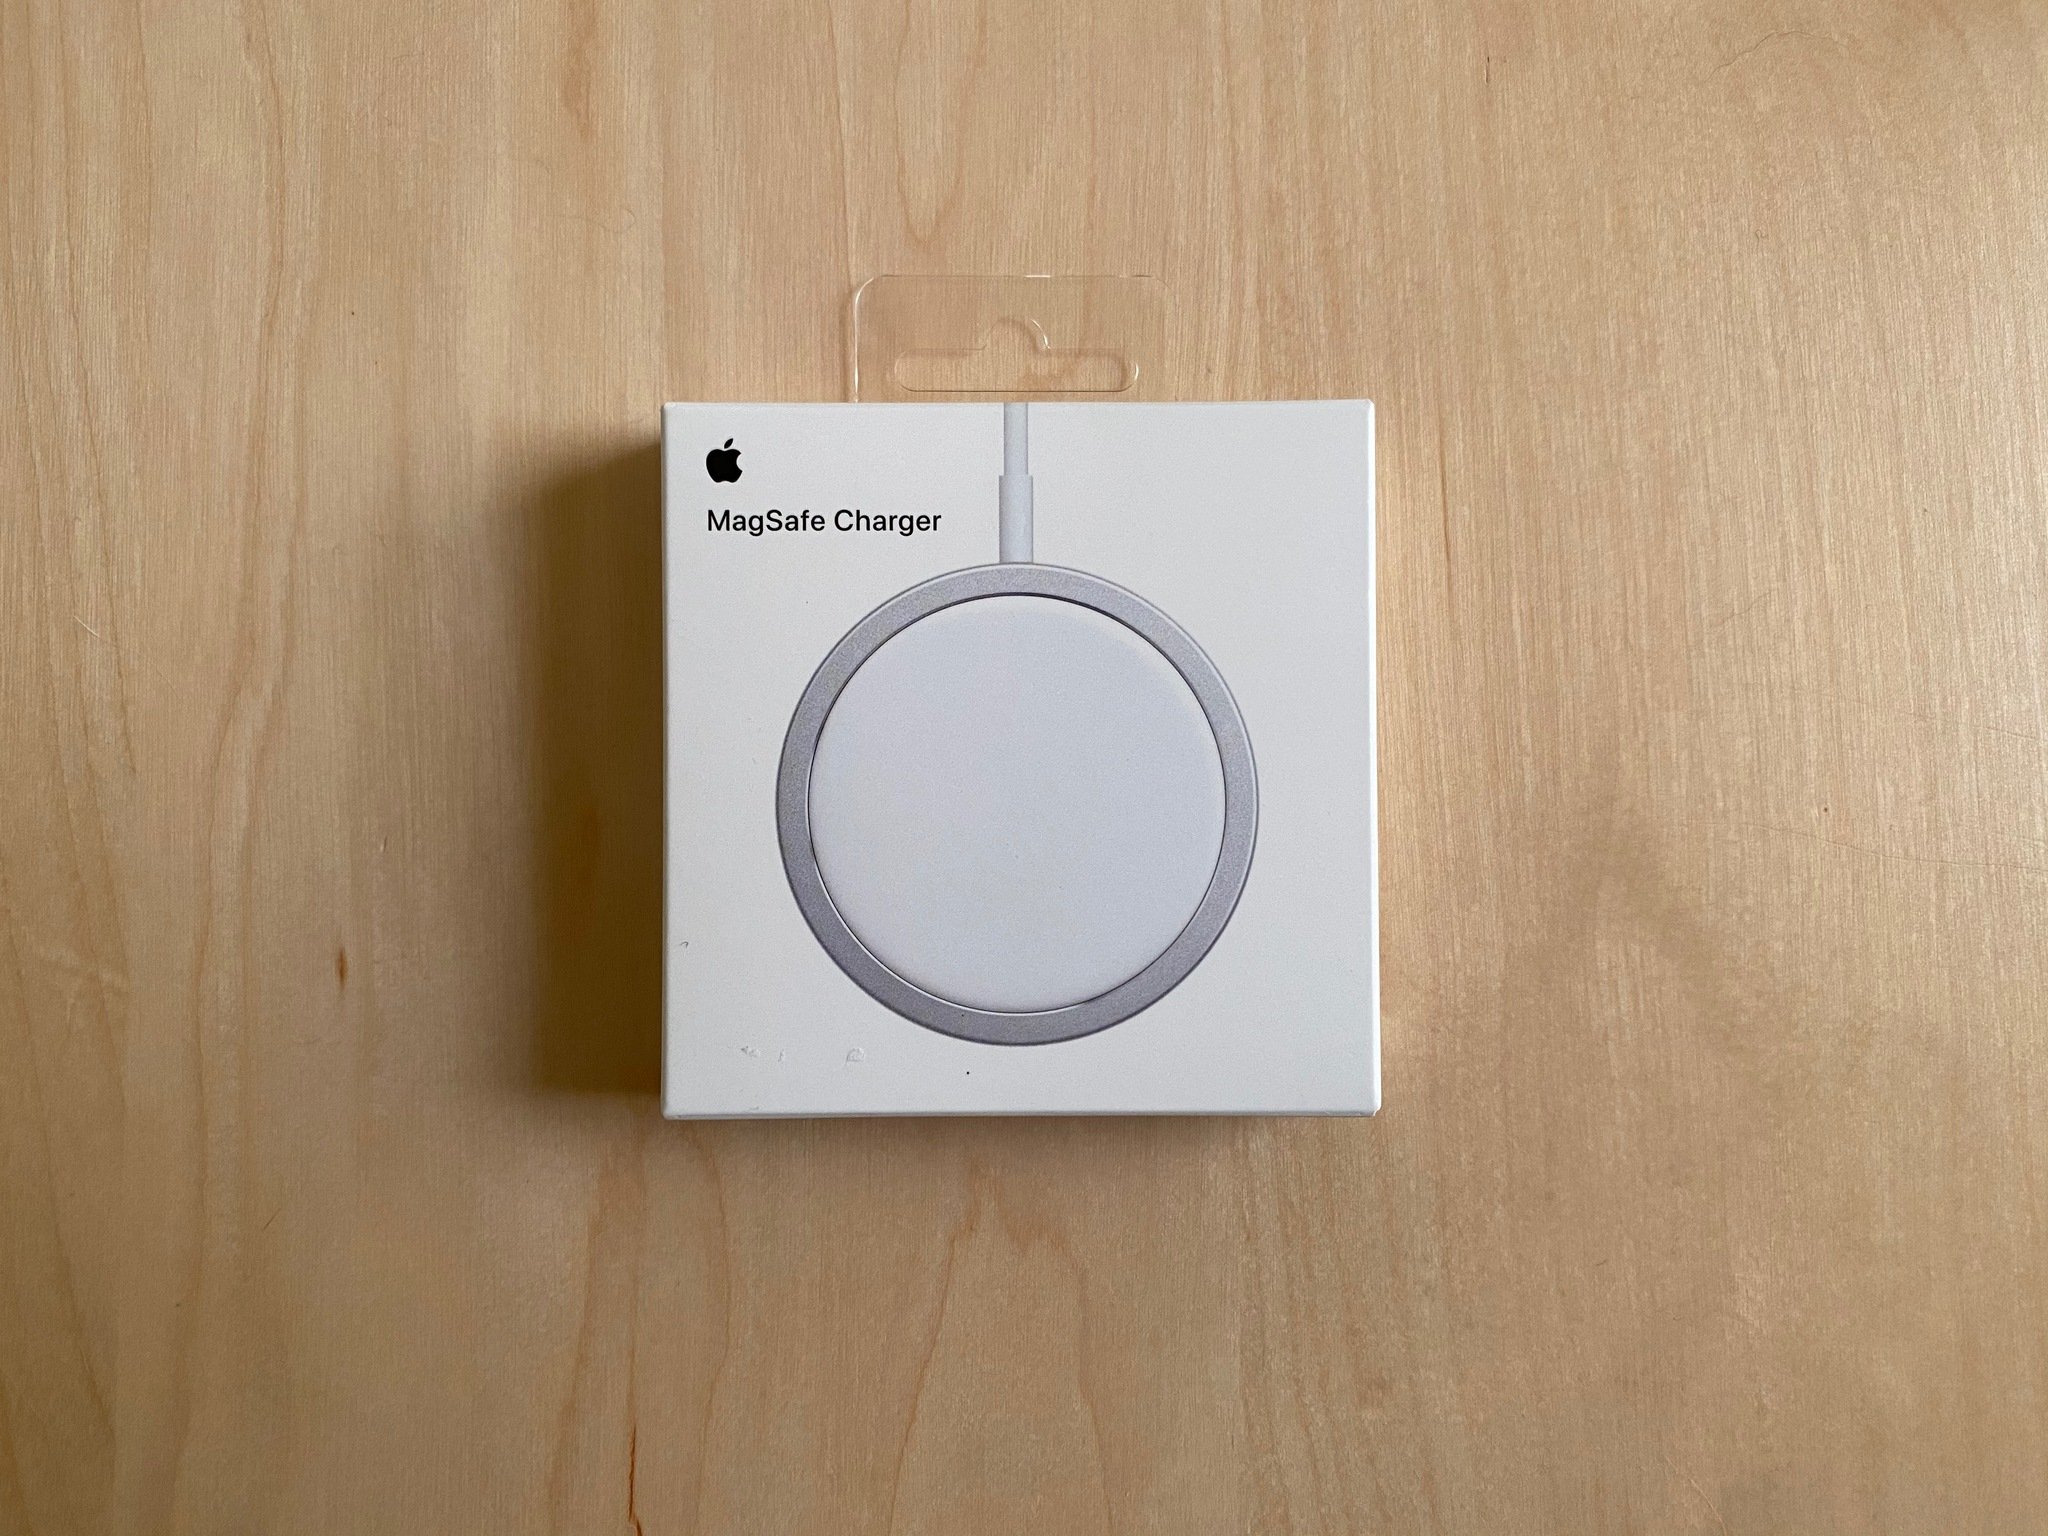 Magsafe Charger Packaging